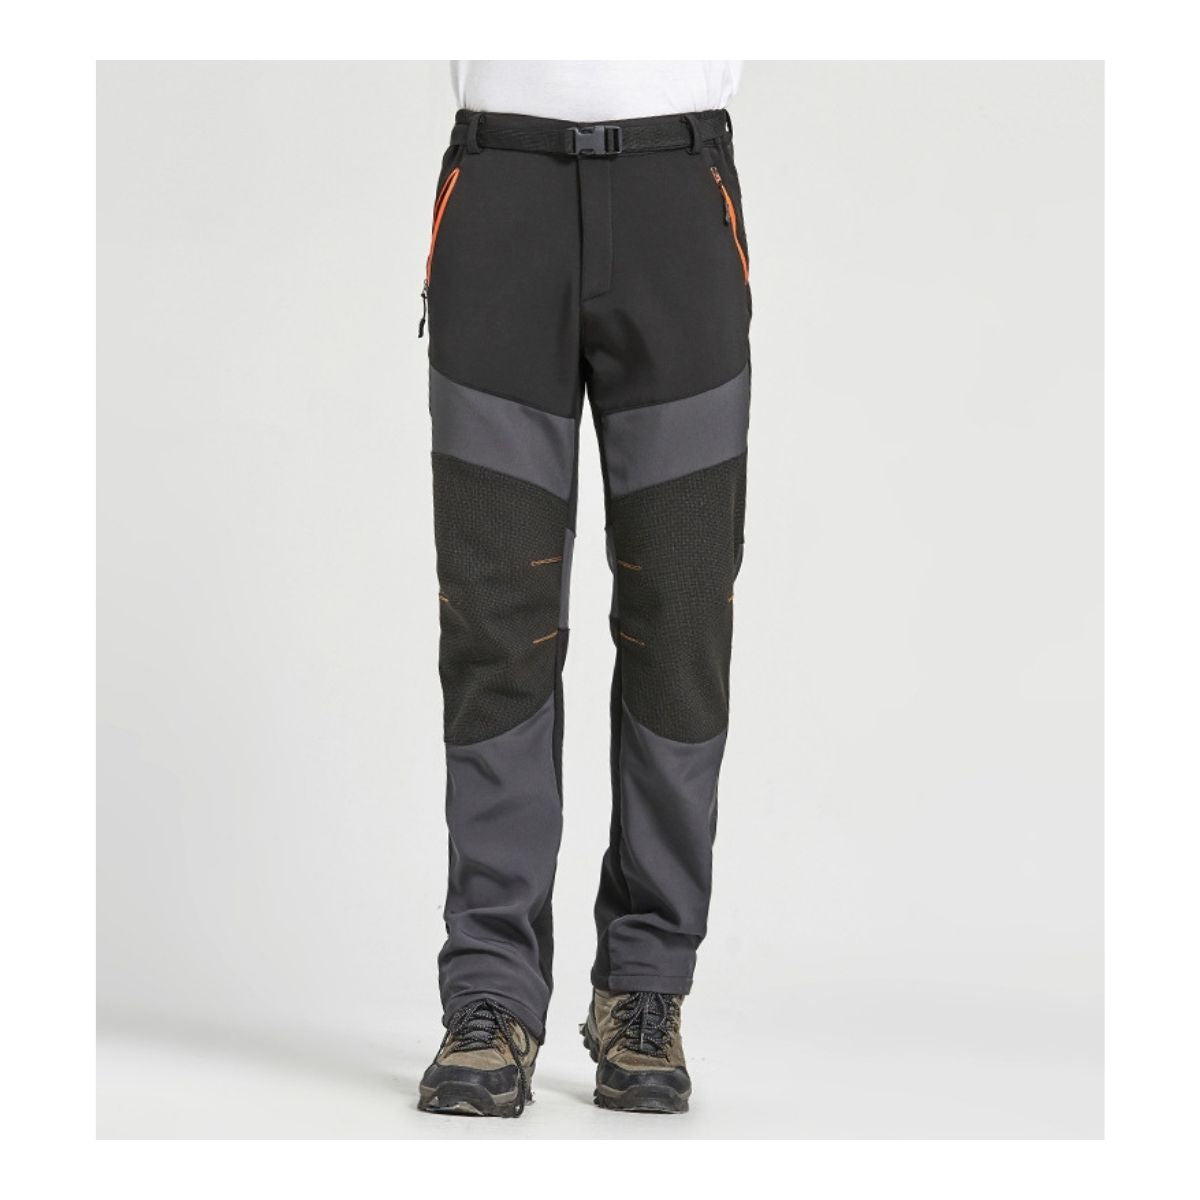 Gokyo Trekking and Hiking Pants - Cold Weather - Sherpa Series